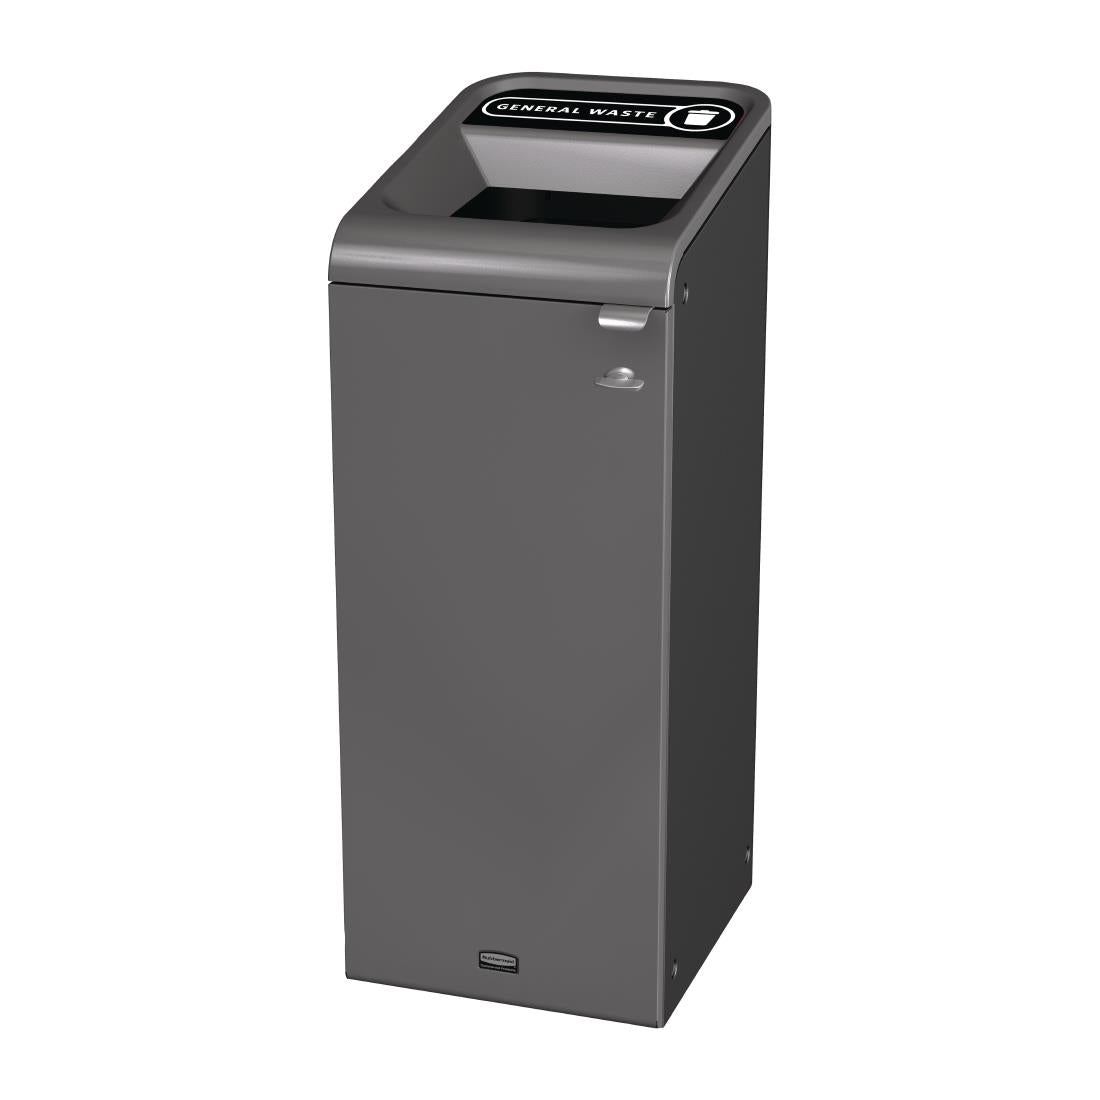 CX978 Rubbermaid Configure Recycling Bin with General Waste Label Black 57L JD Catering Equipment Solutions Ltd